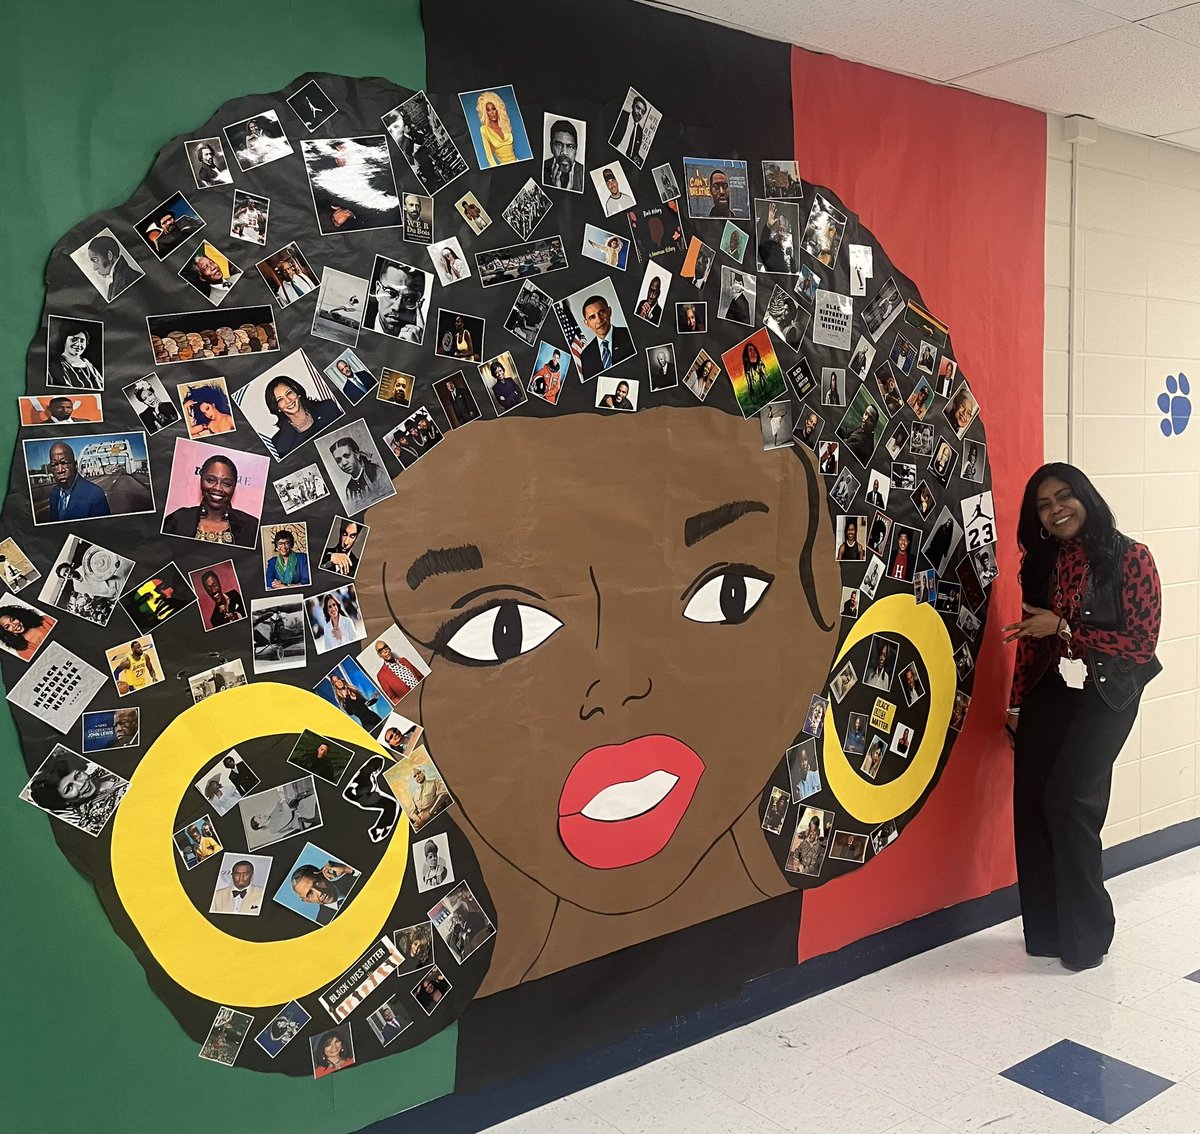 Ridge Circle/U46 Illinois:  Celebrating history in a big inclusive way!! Such an awesome hallway lesson!  @IE_empower @sdu46